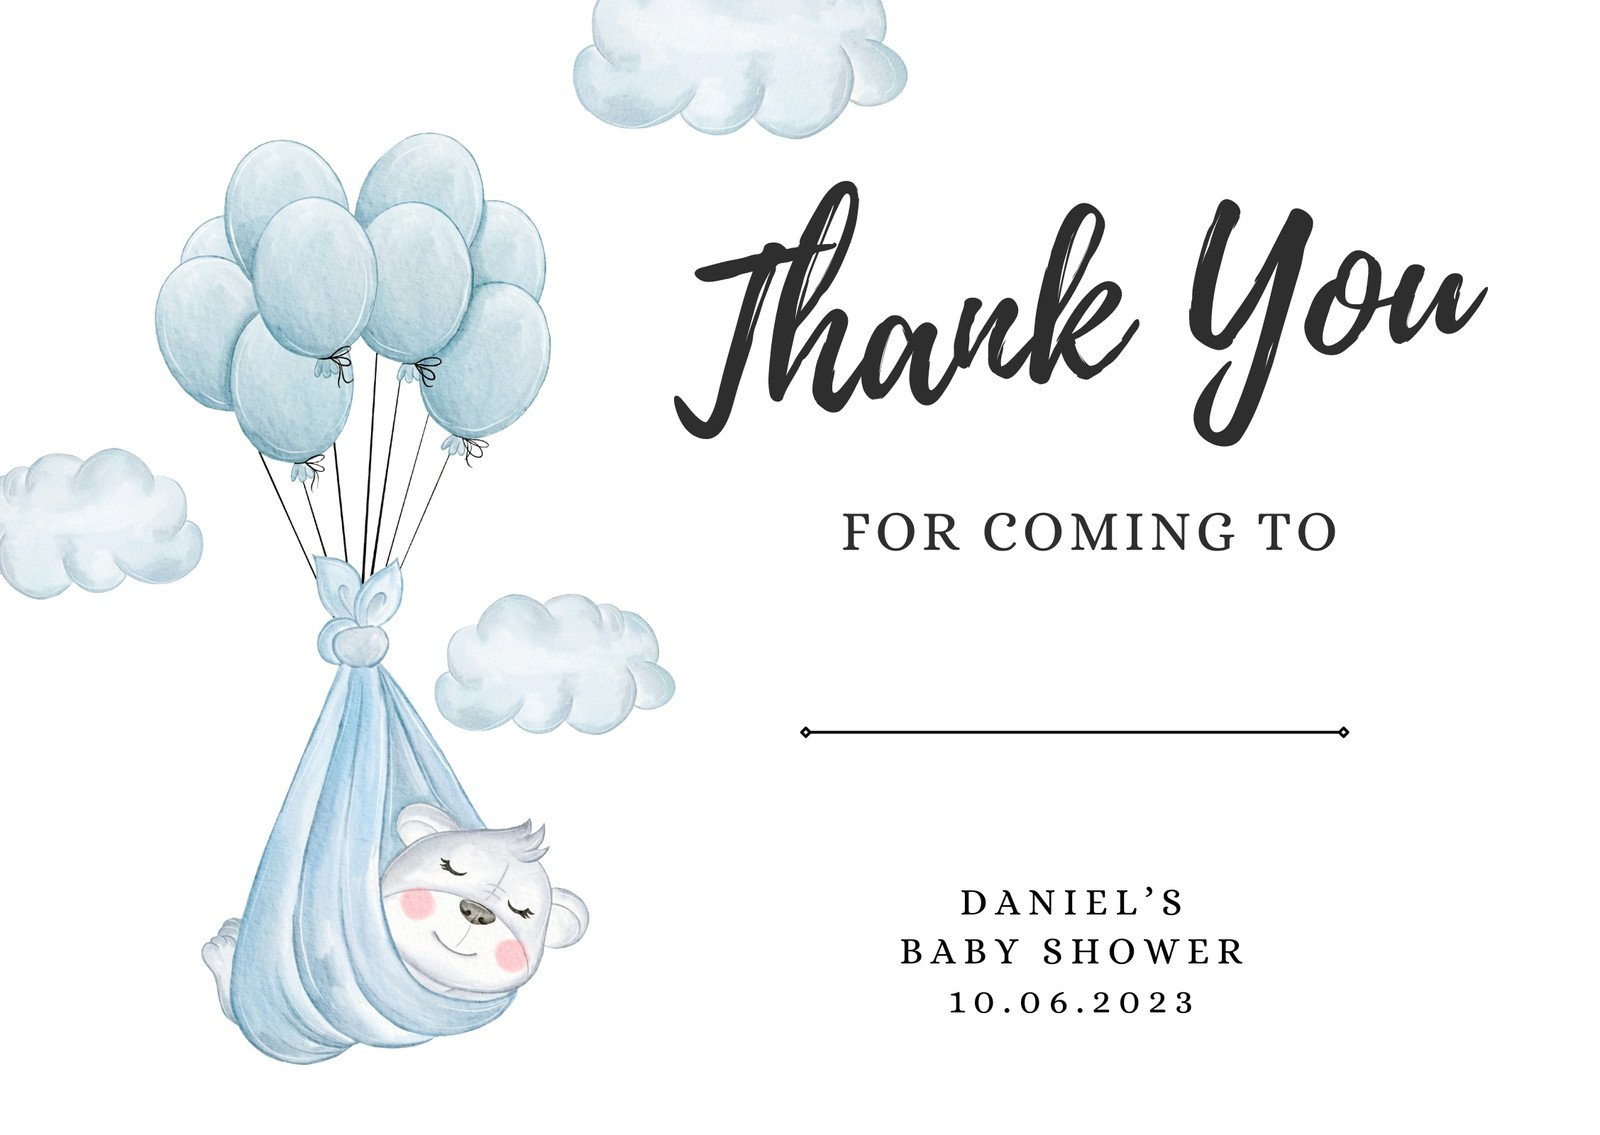 Free Custom Printable Baby Shower Card Templates | Canva pertaining to Free Printable Baby Shower Cards Templates